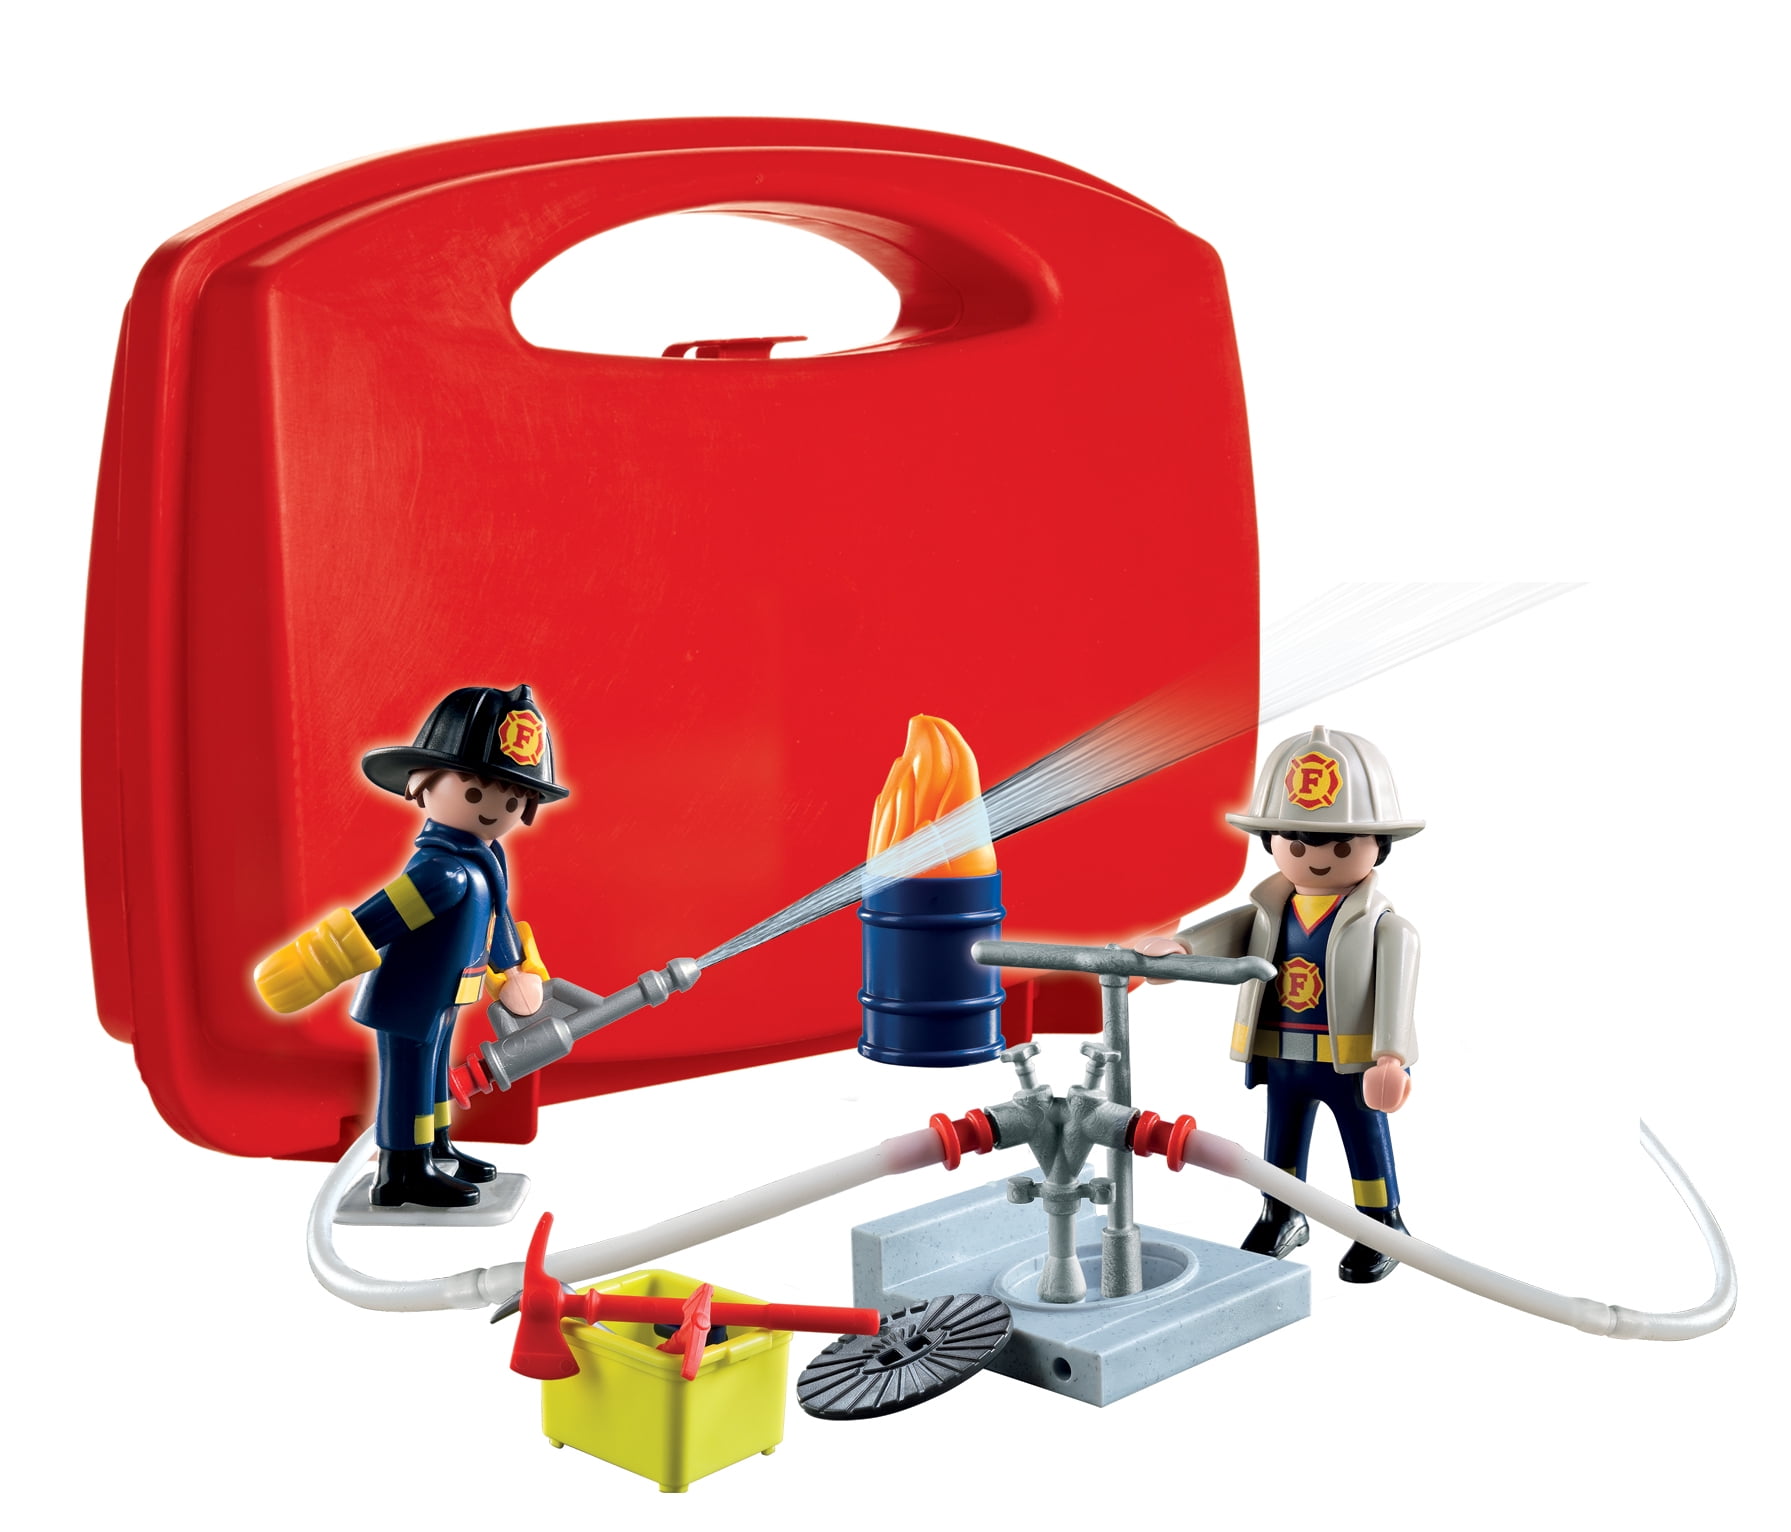 PLAYMOBIL "Fire" Carrying Case Large Free Shipping 